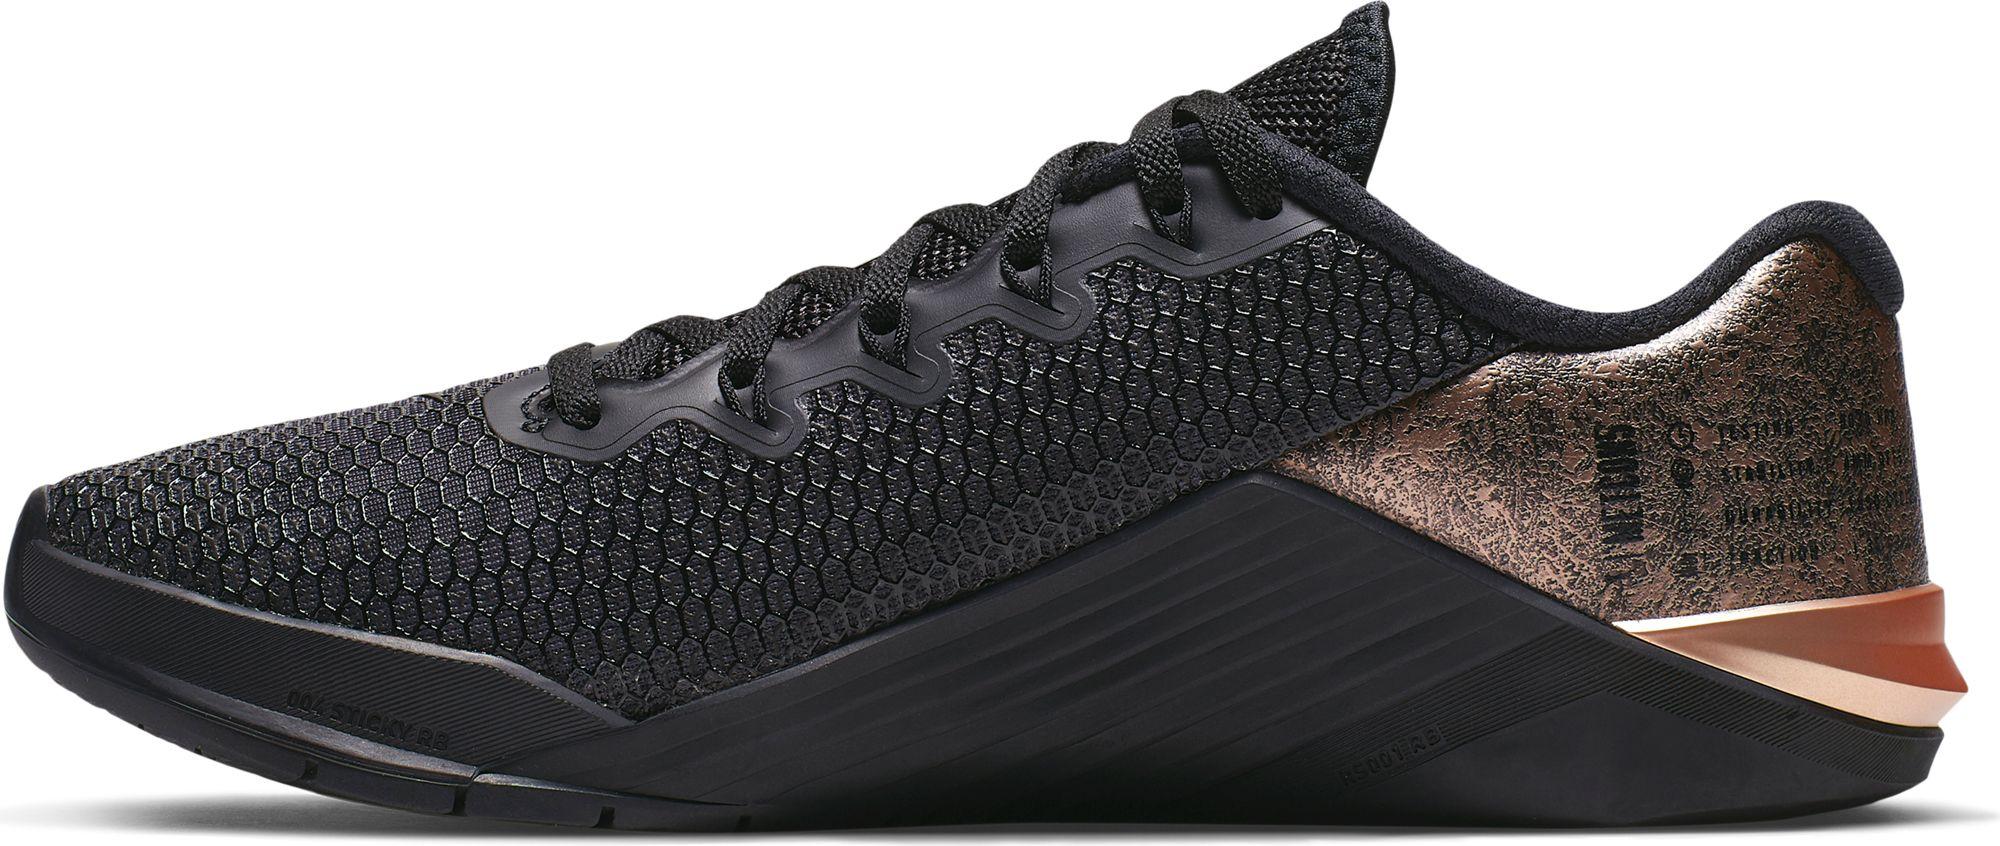 black and rose gold nike metcon